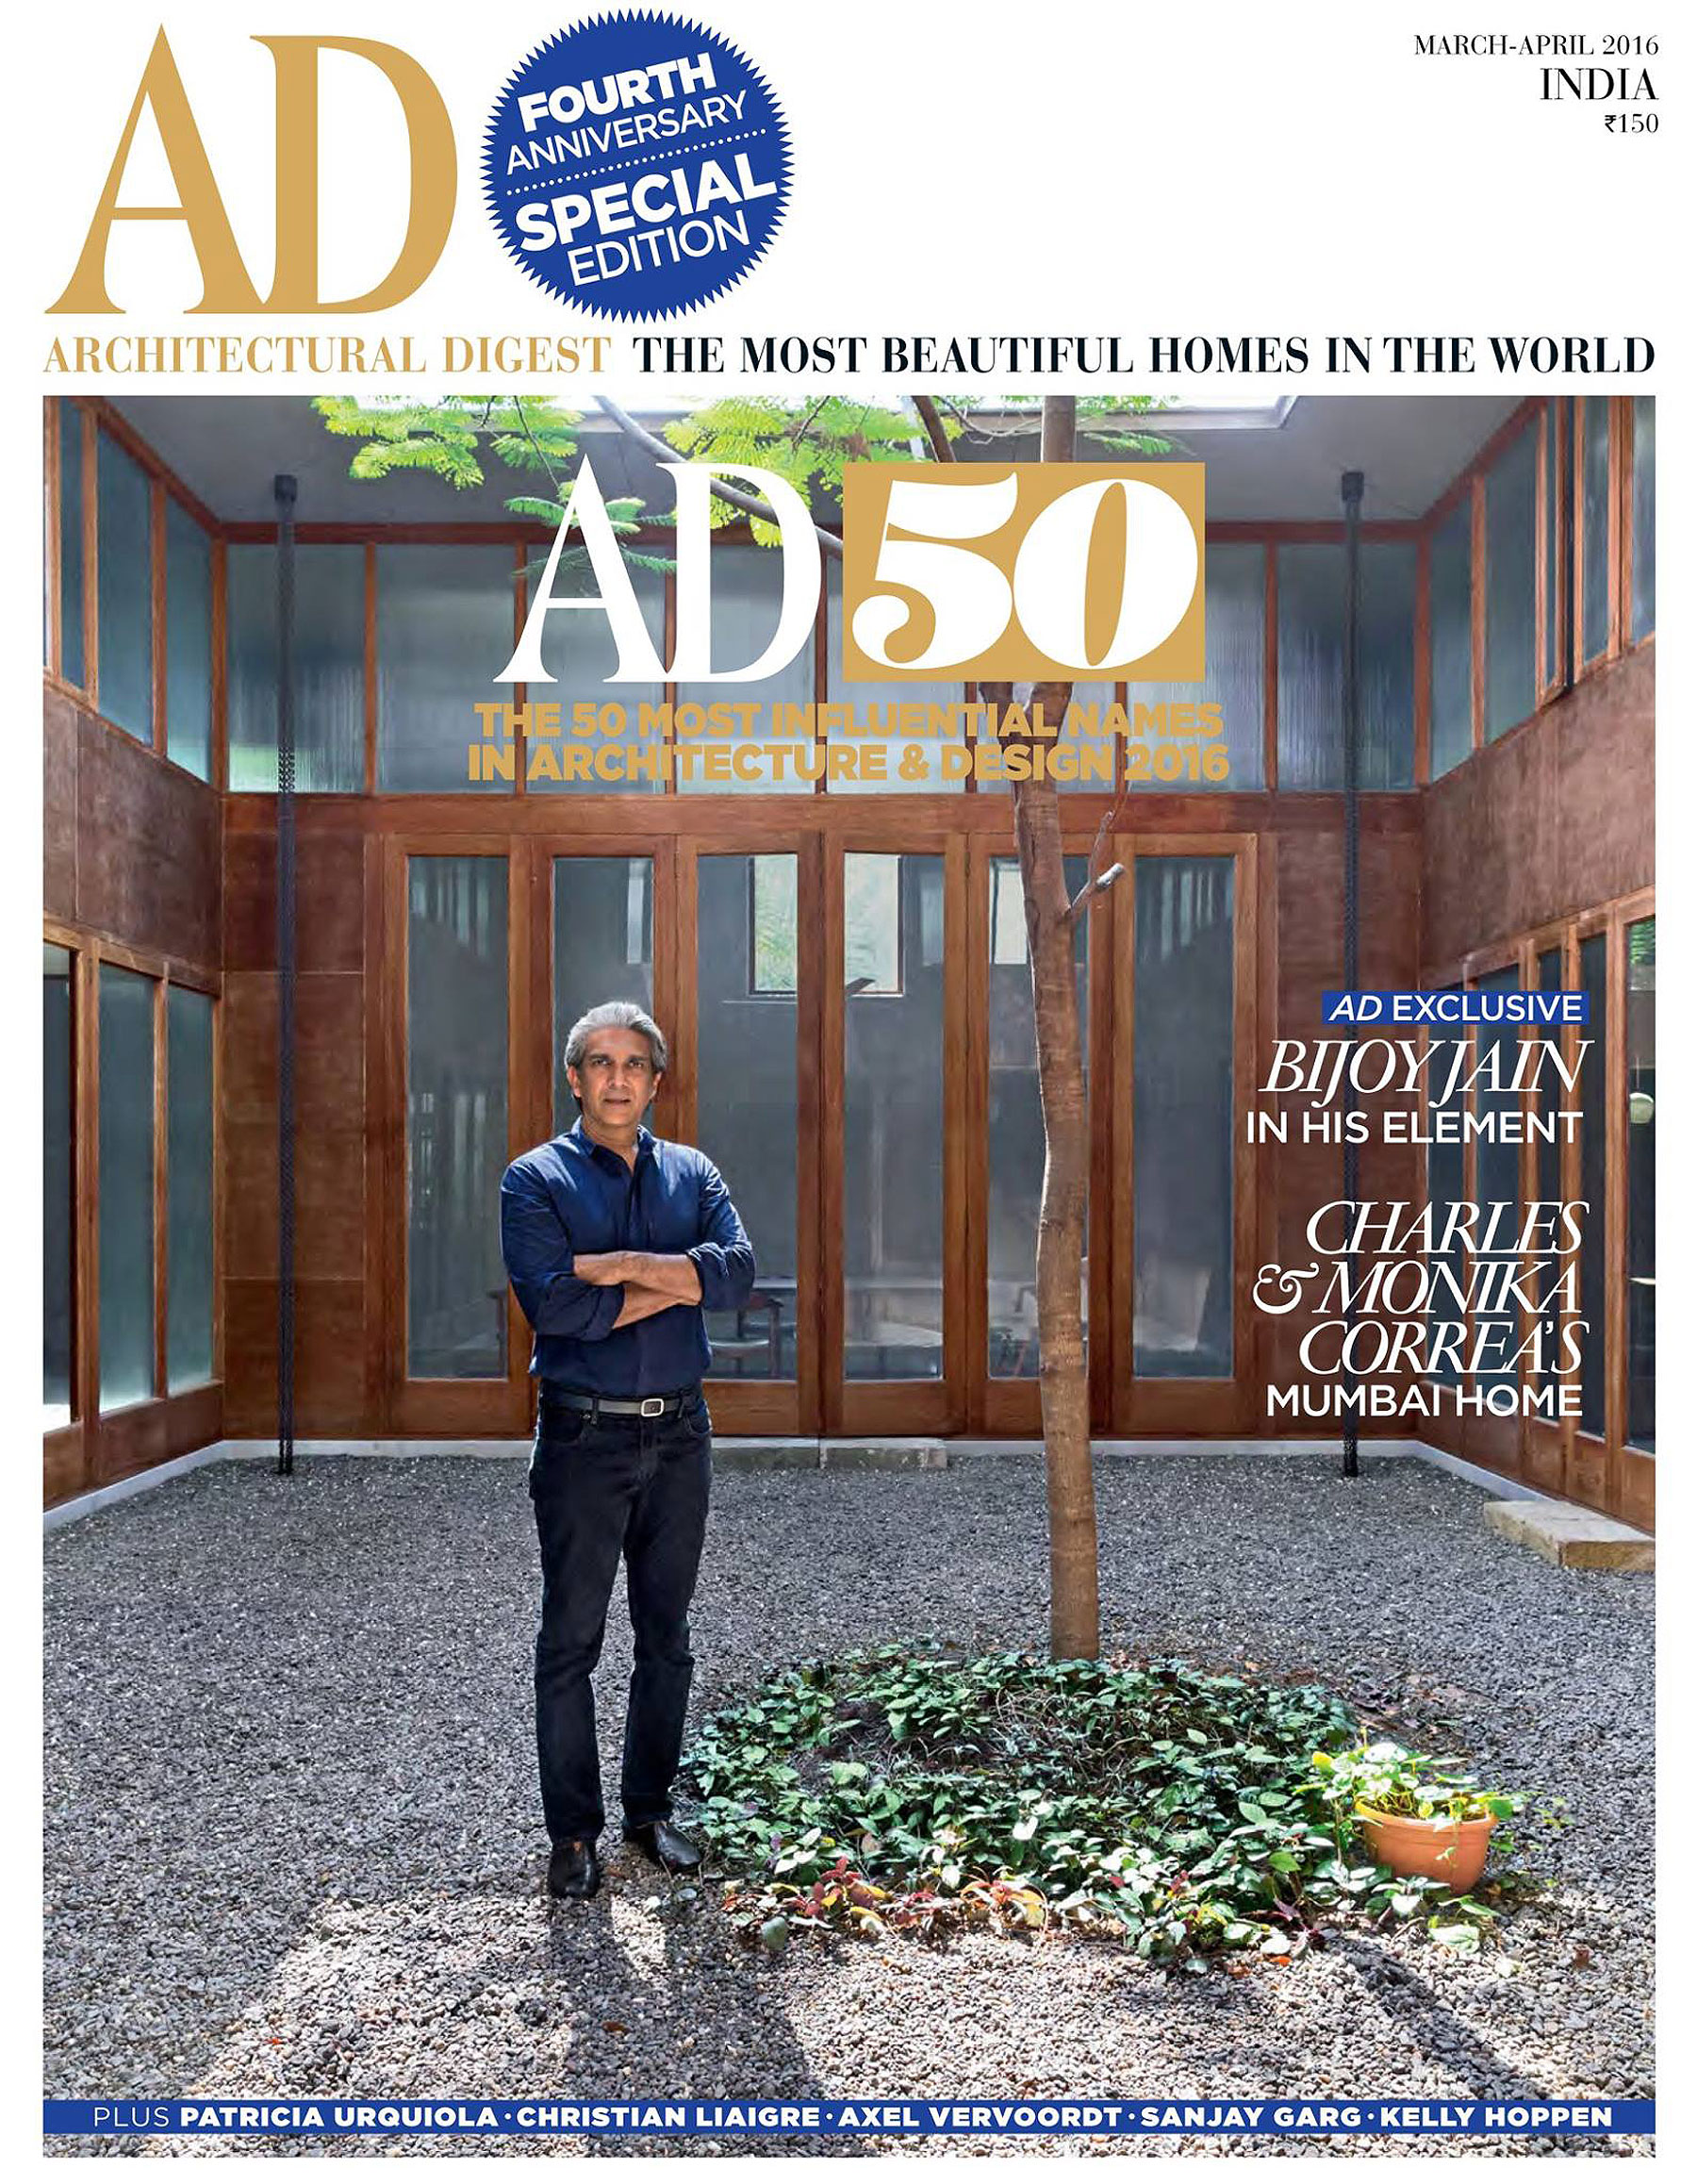 lijo-reny-architects-wins-the-ad50-2016-and-becomes-one-among-indias-50-most-influential-names-in-architecture-and-design-1